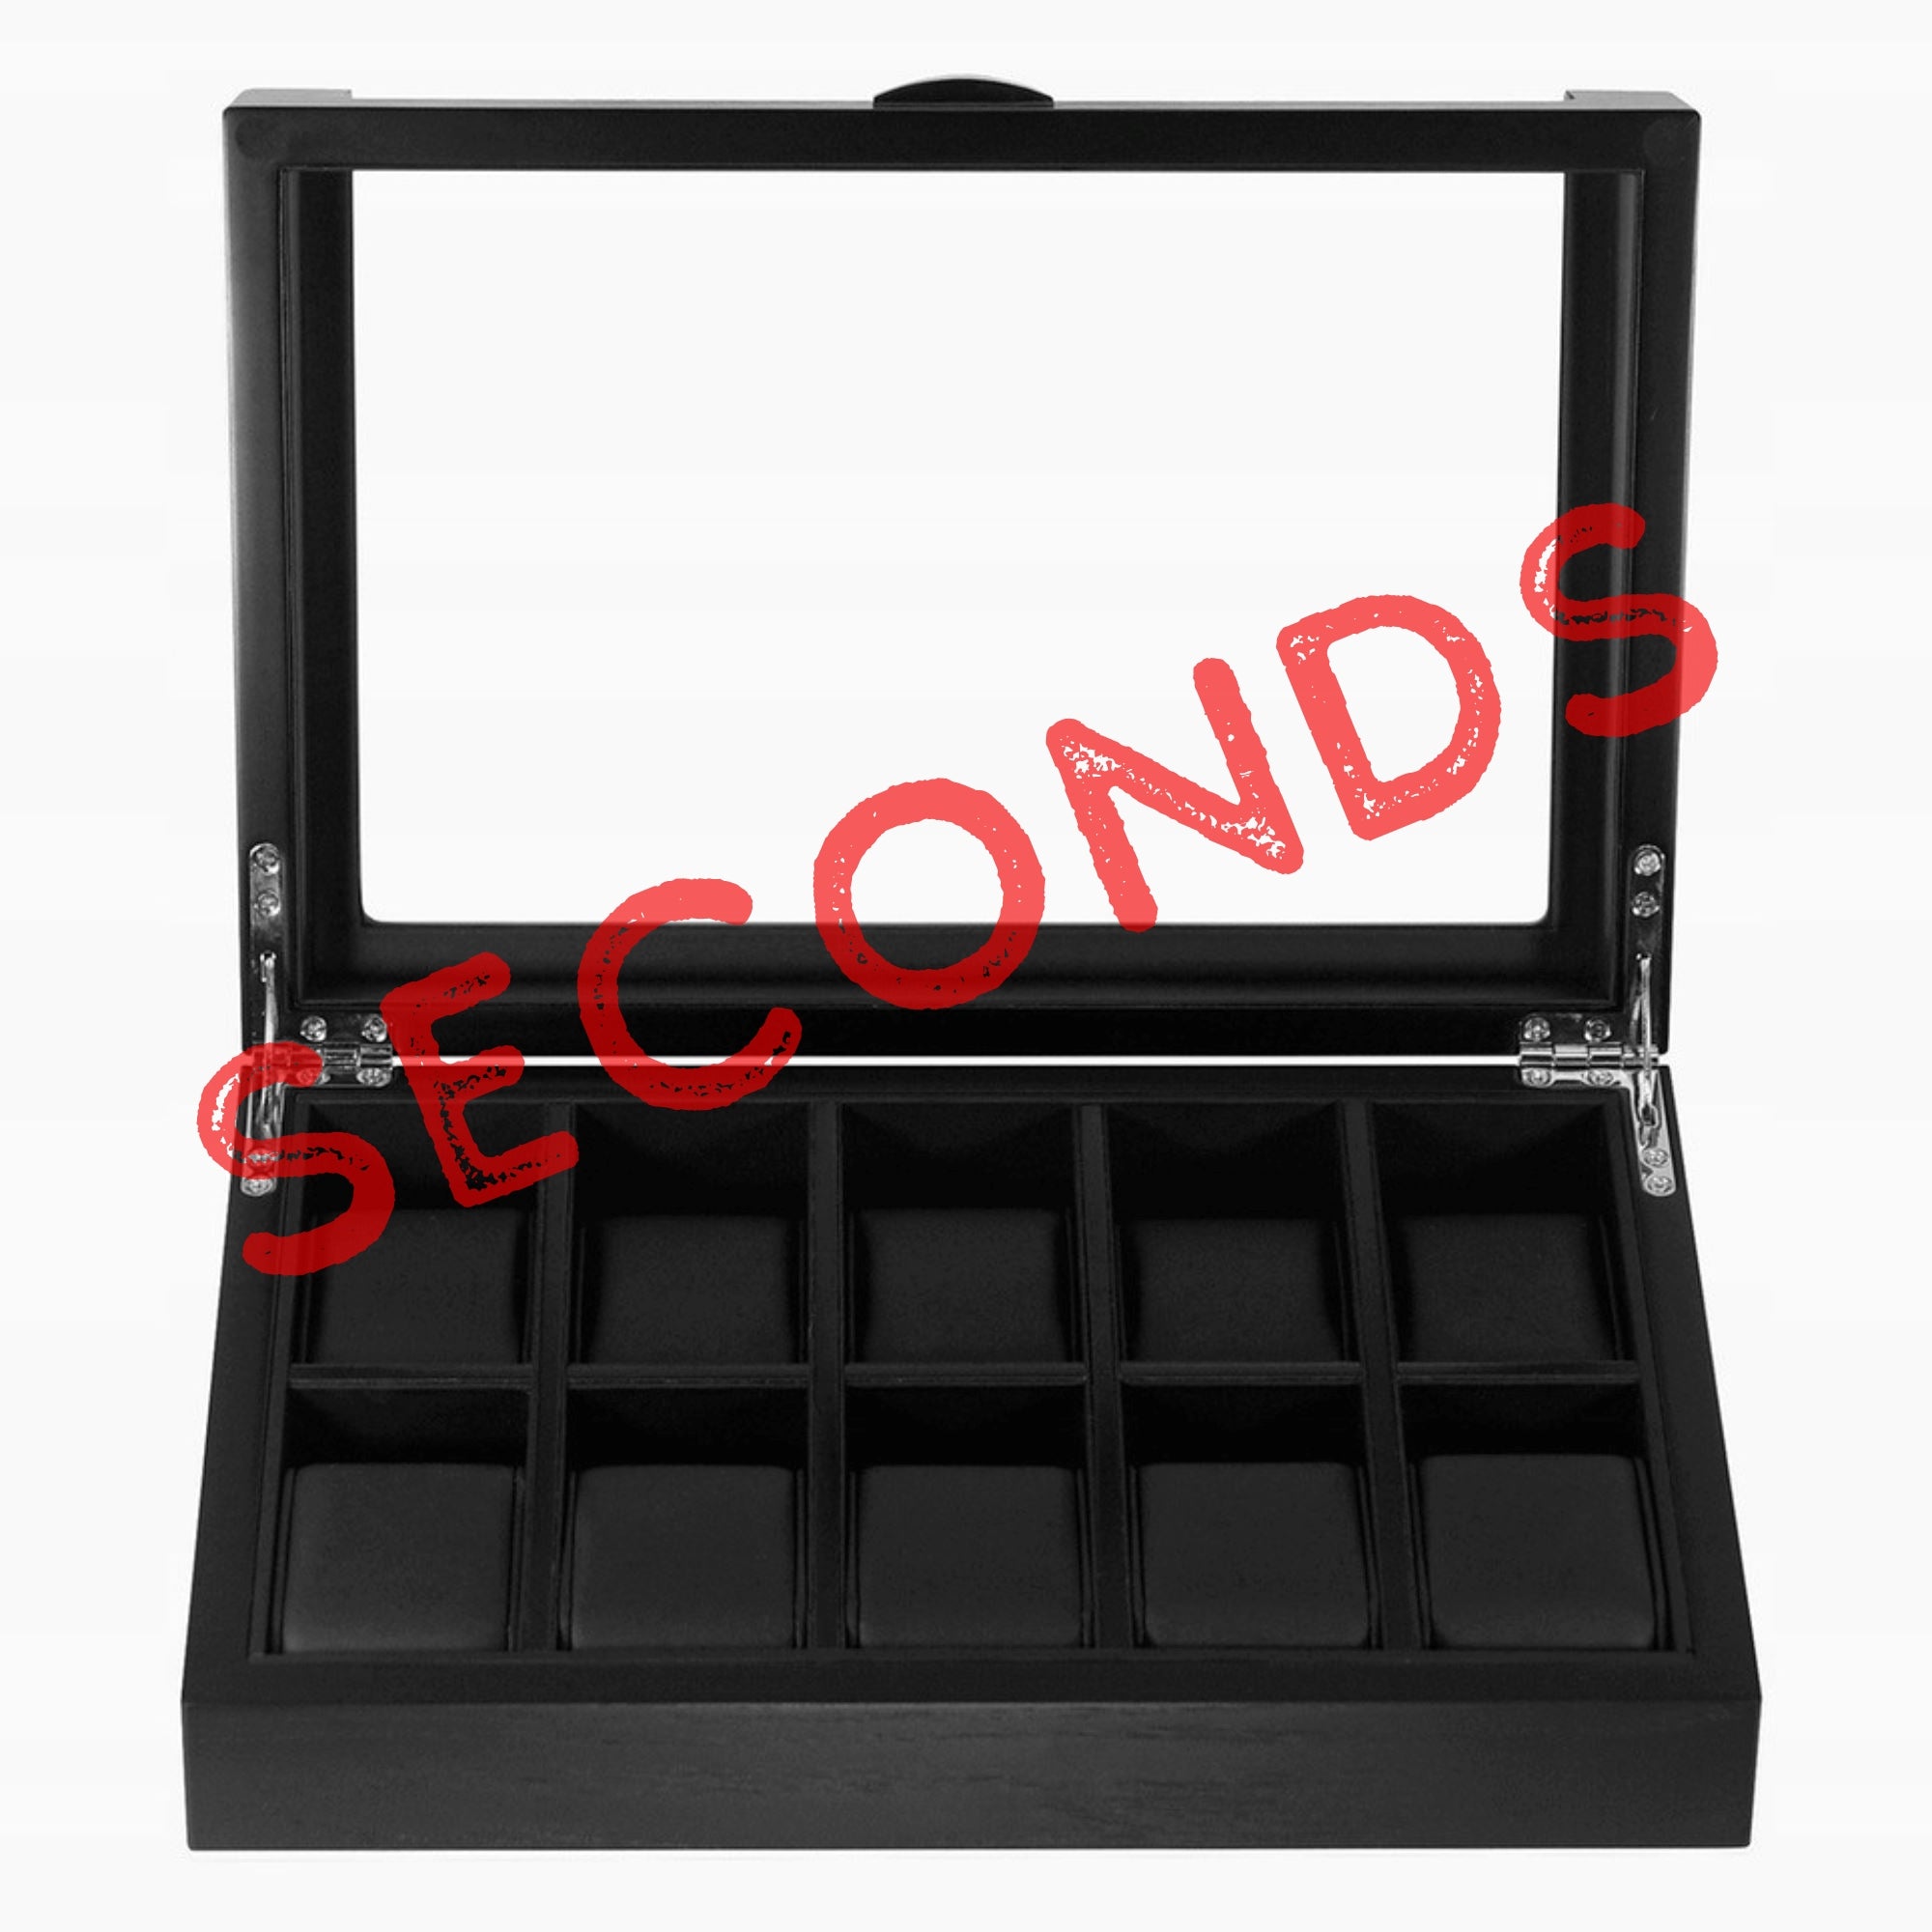 Seconds - Black Wooden Watch Box for 10 Watches (a)